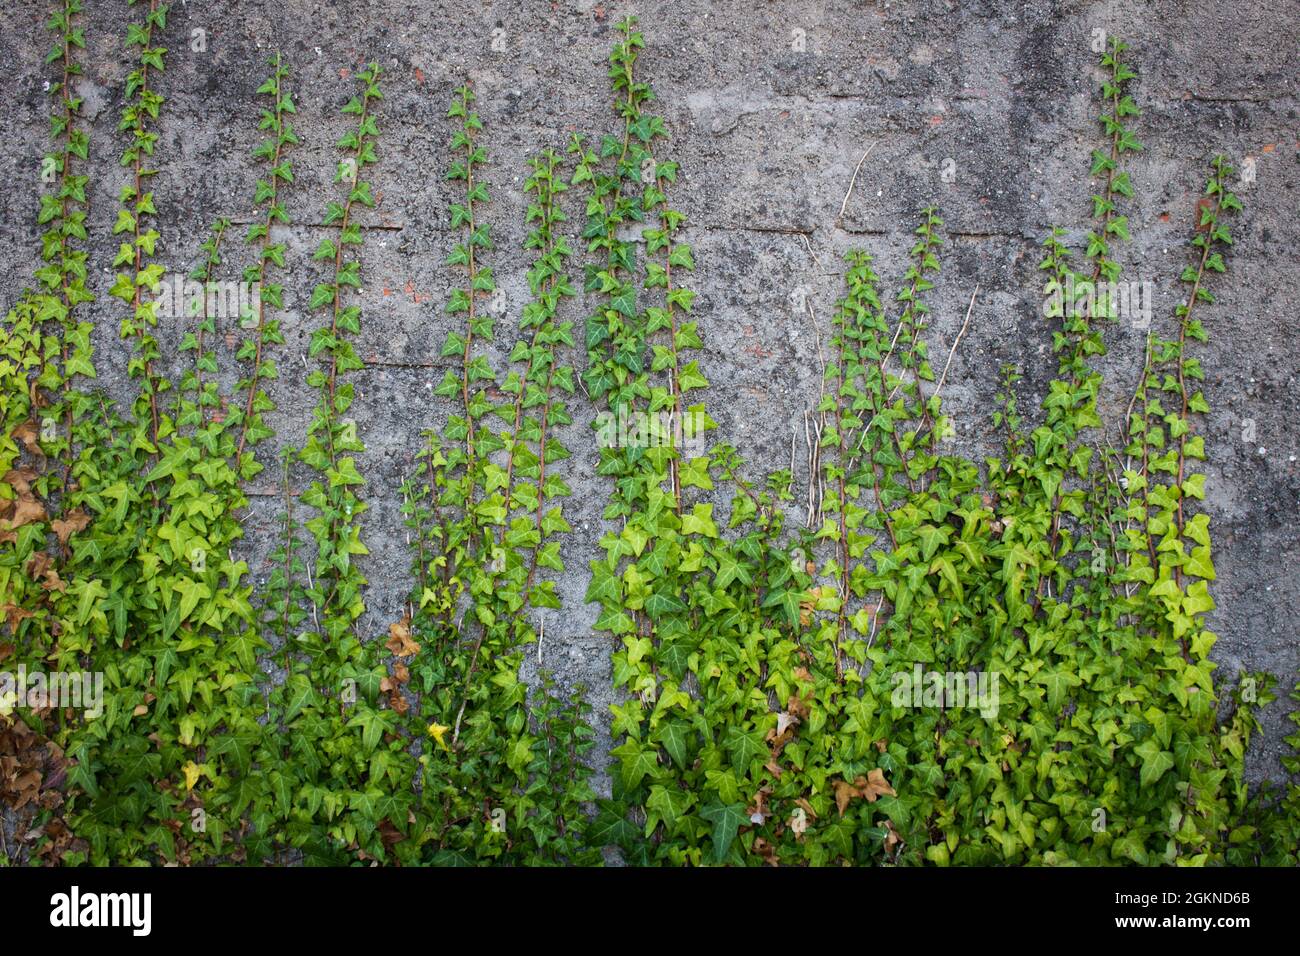 Branches of ivy creeper plant with green leaves climbing old rustic brick wall covered in concrete Stock Photo